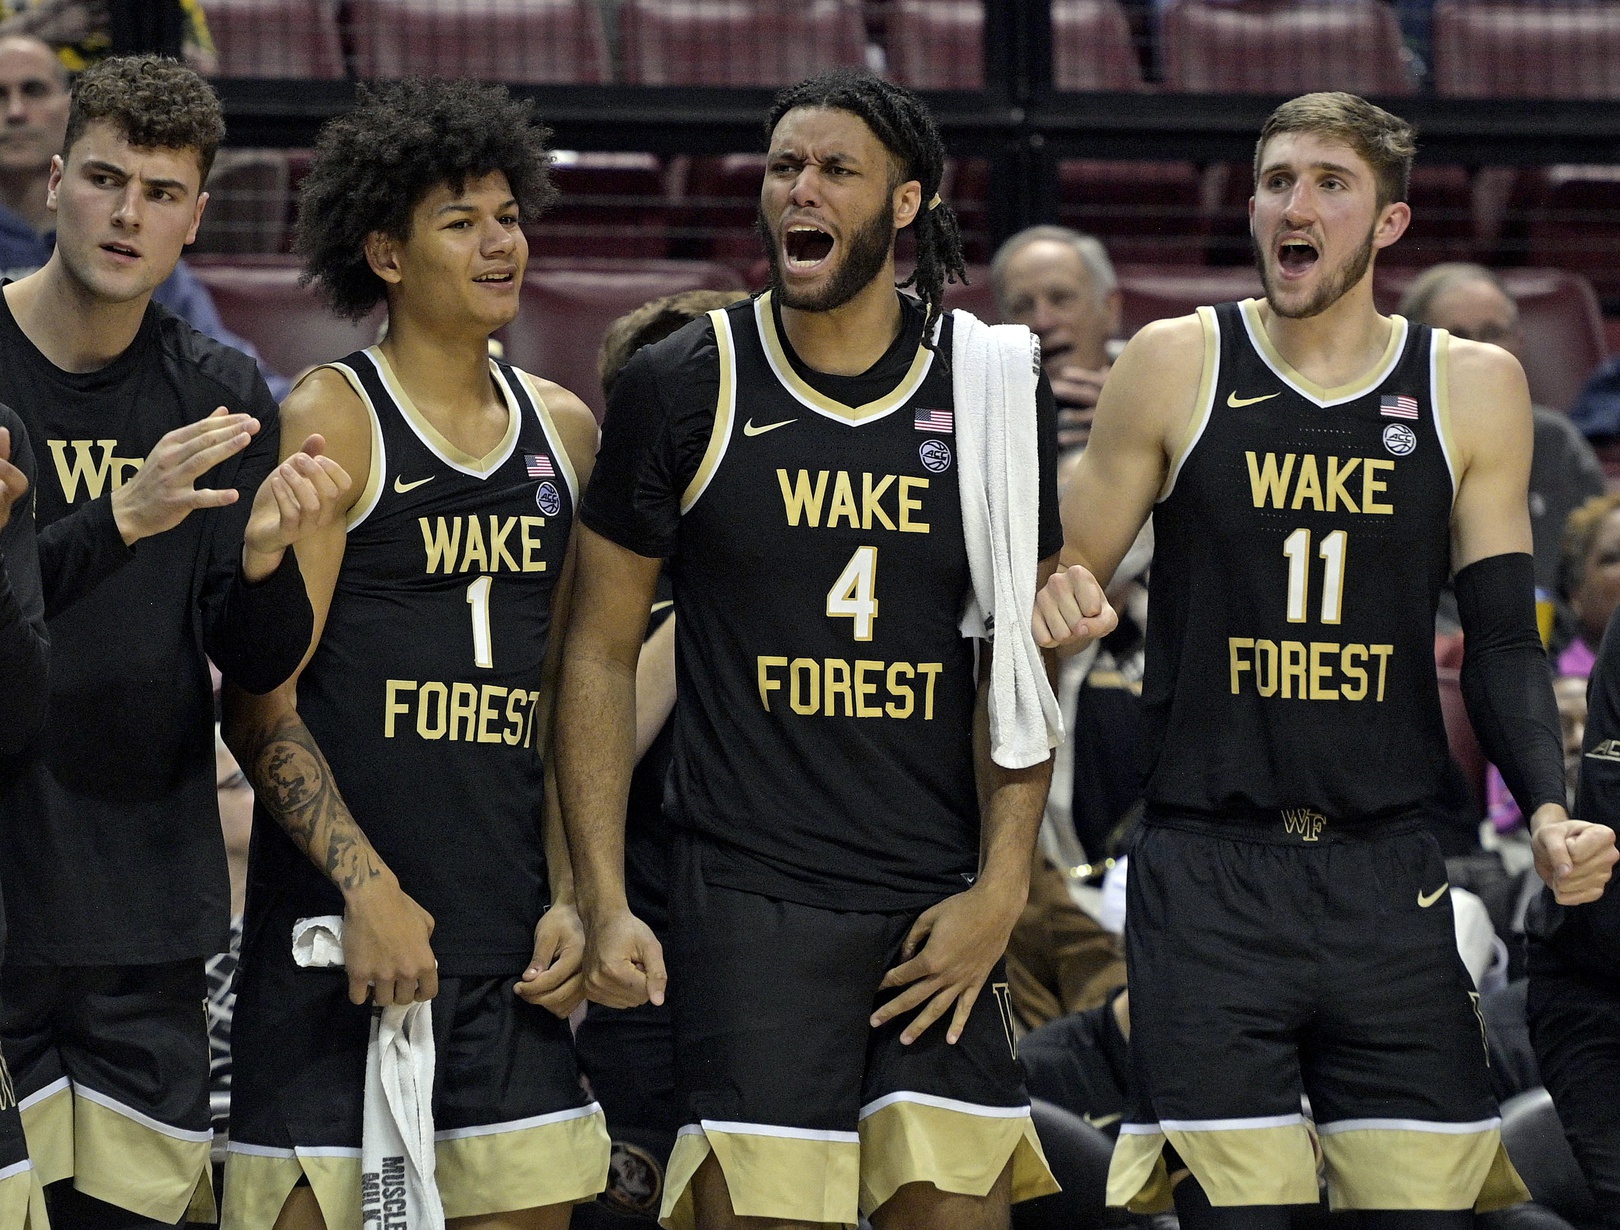 Wake Forest is one of the new ACC contenders.